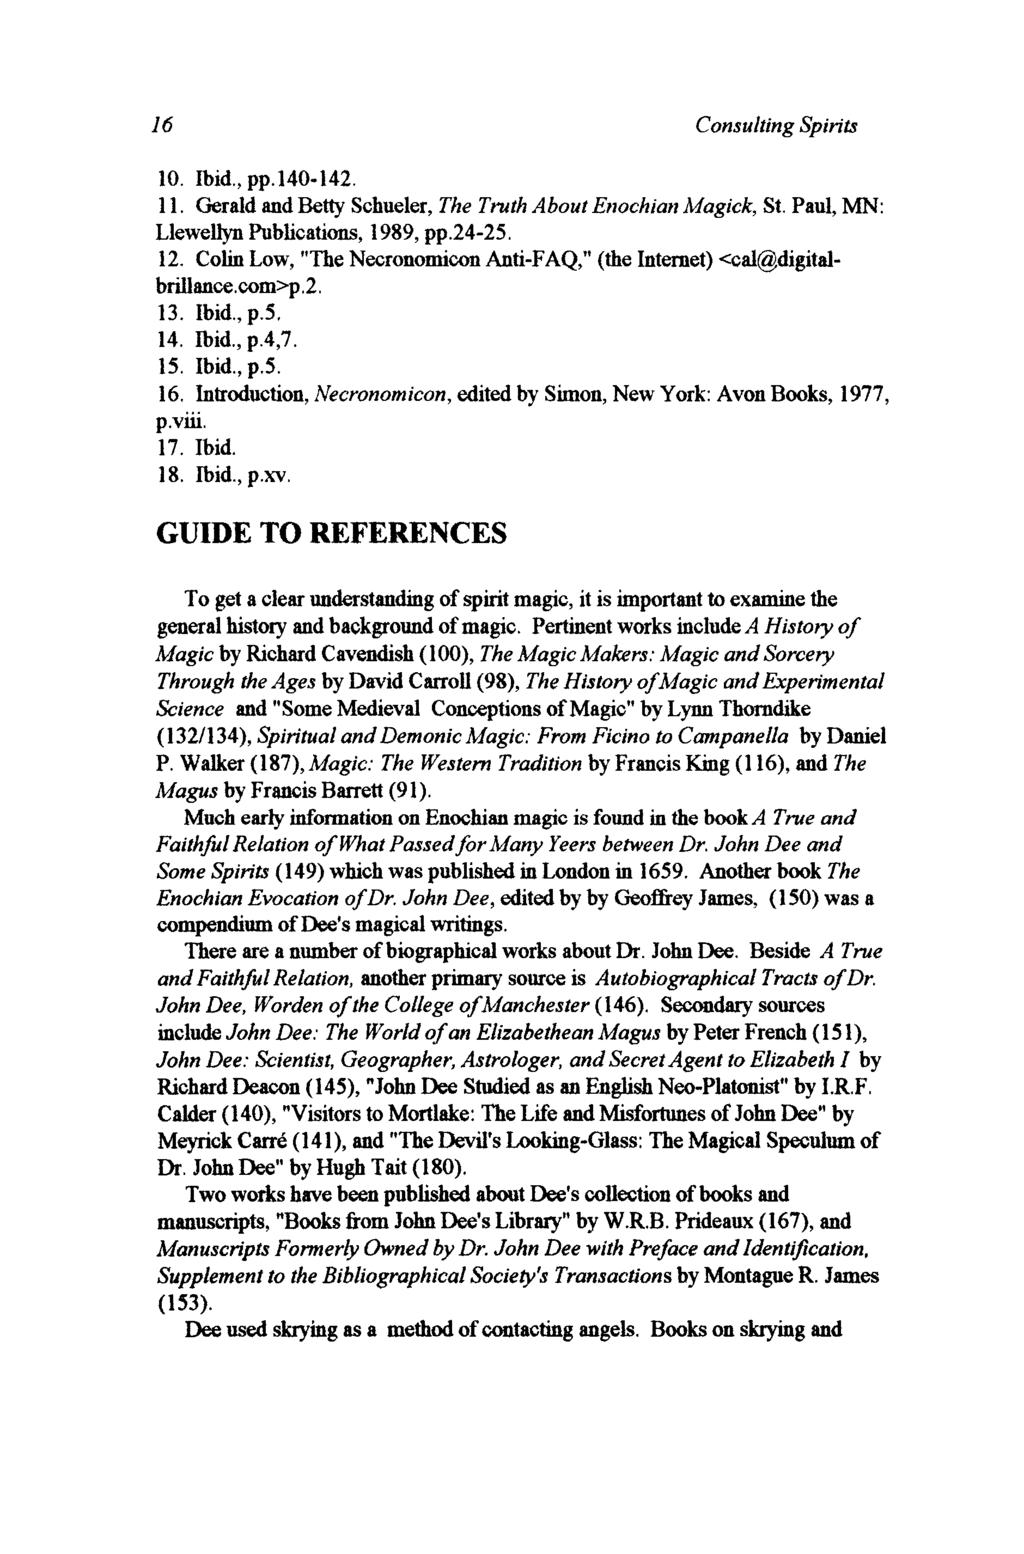 16 Consulting Spirits 10. Ibid.,pp.l40-142. 11. Gerald and Betty Schueler, The Truth About Enochian Magick, St. Paul, MN: Llewellyn Publications, 1989, pp.24-25. 12.